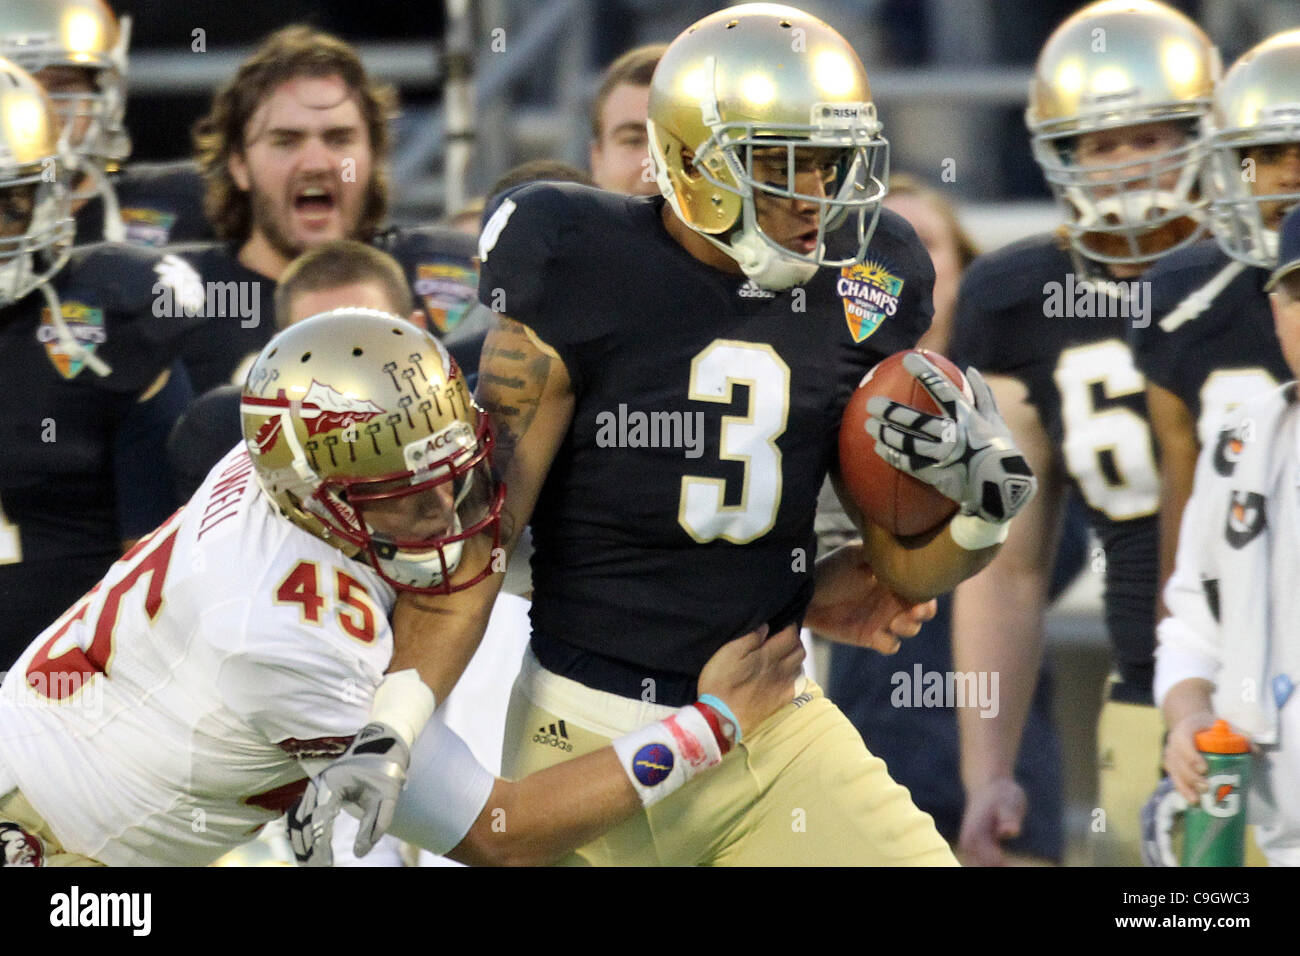 Dec. 29, 2011 - Orlando, Florida, U.S - Notre Dame Fighting Irish wide receiver Michael Floyd (3) is tackled by Florida State Seminoles punter Shawn Powell (45) during the 2011 Champs Sports Bowl between the Florida State Seminoles and Notre Dame Fighting Irish. Florida State Won 18-14. (Credit Imag Stock Photo